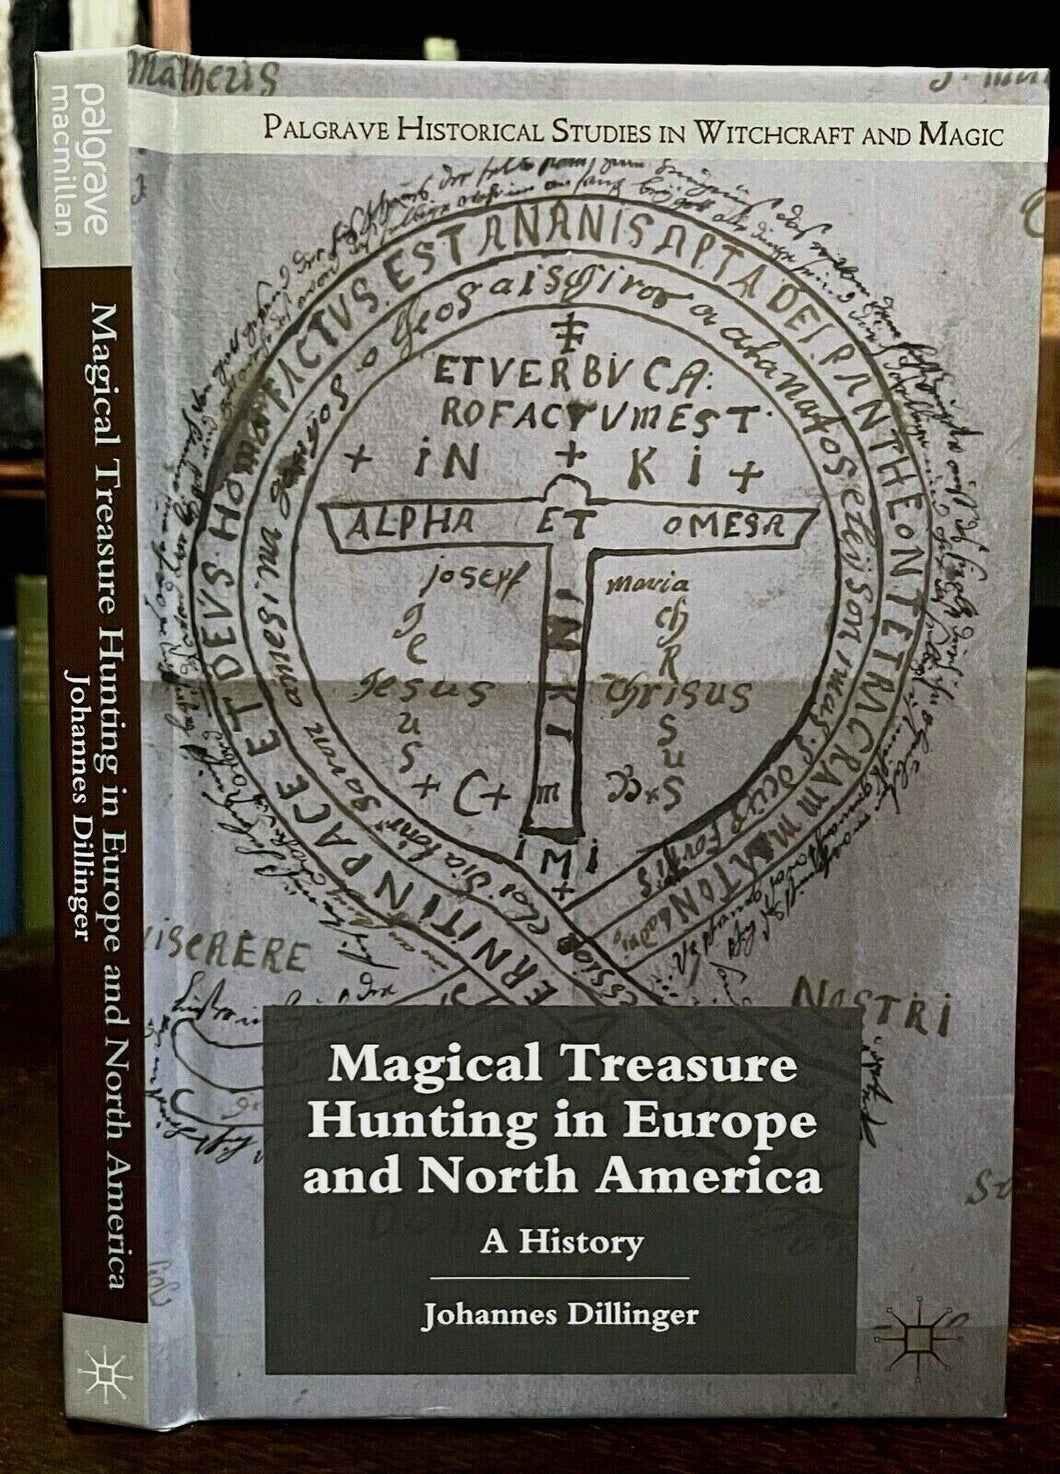 MAGICAL TREASURE HUNTING IN EUROPE AND NORTH AMERICA - 2012 MAGICK ARCHAEOLOGY